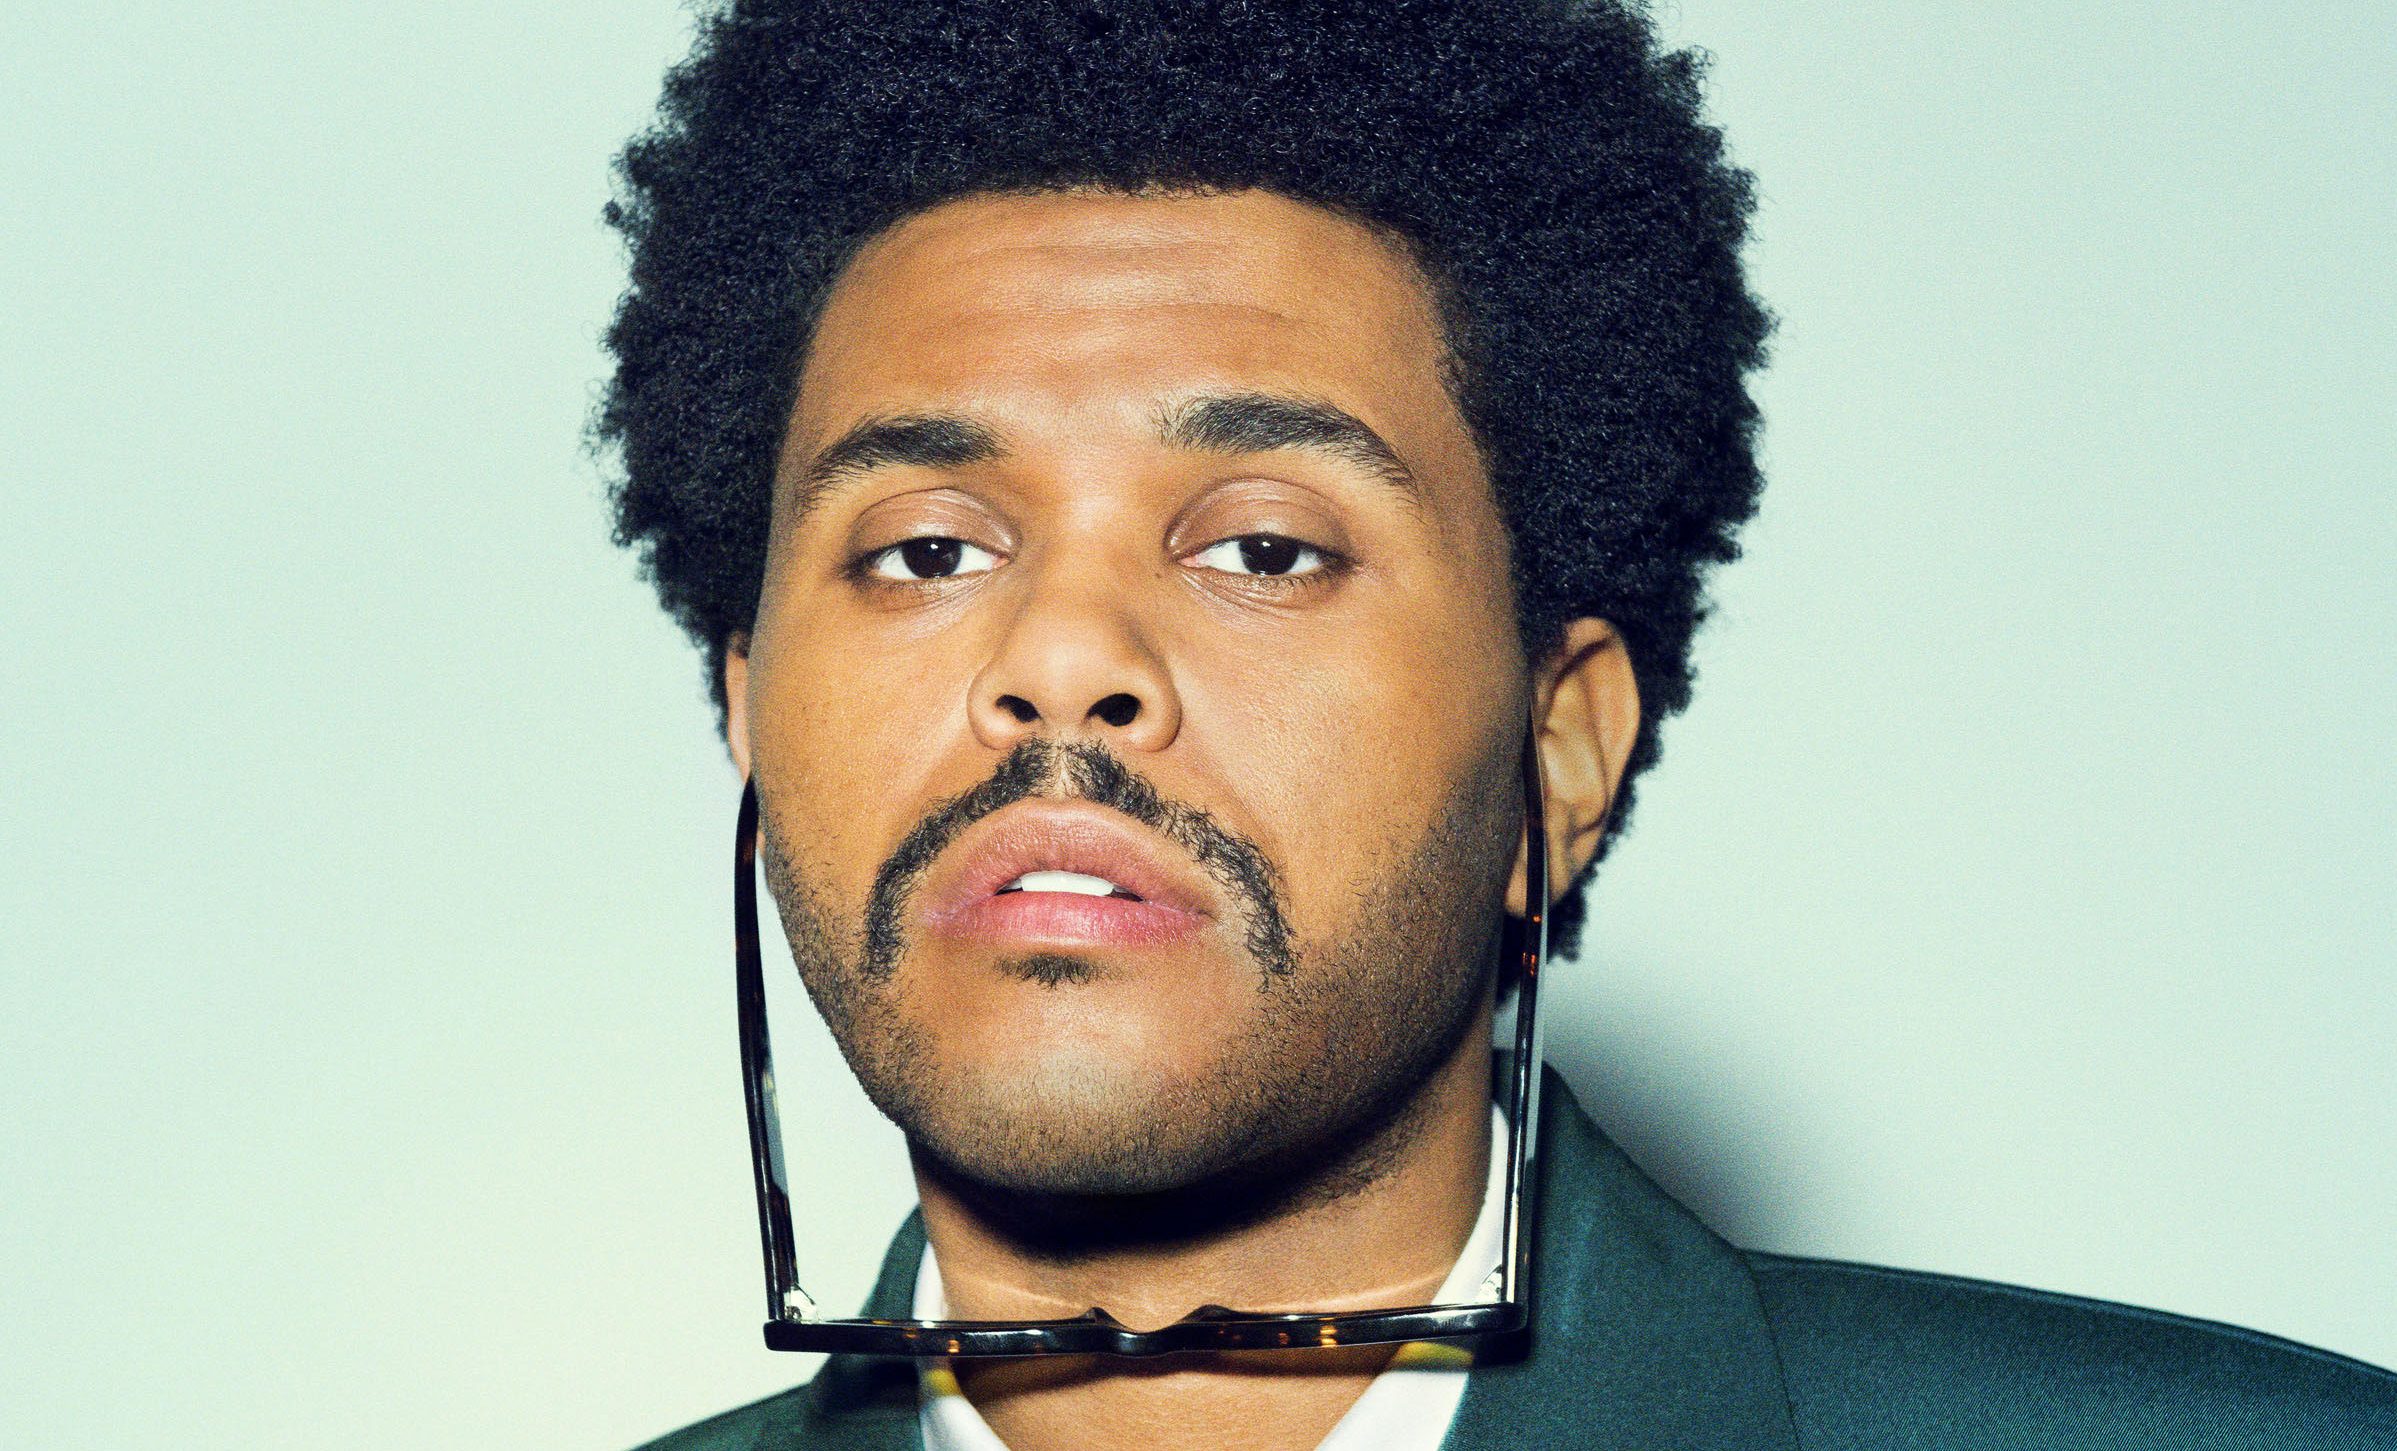 The Weeknd Working On 5th Album-Will Be Inspired By Black Lives Matter  Movement, The Pandemic And Election - DTLR Radio